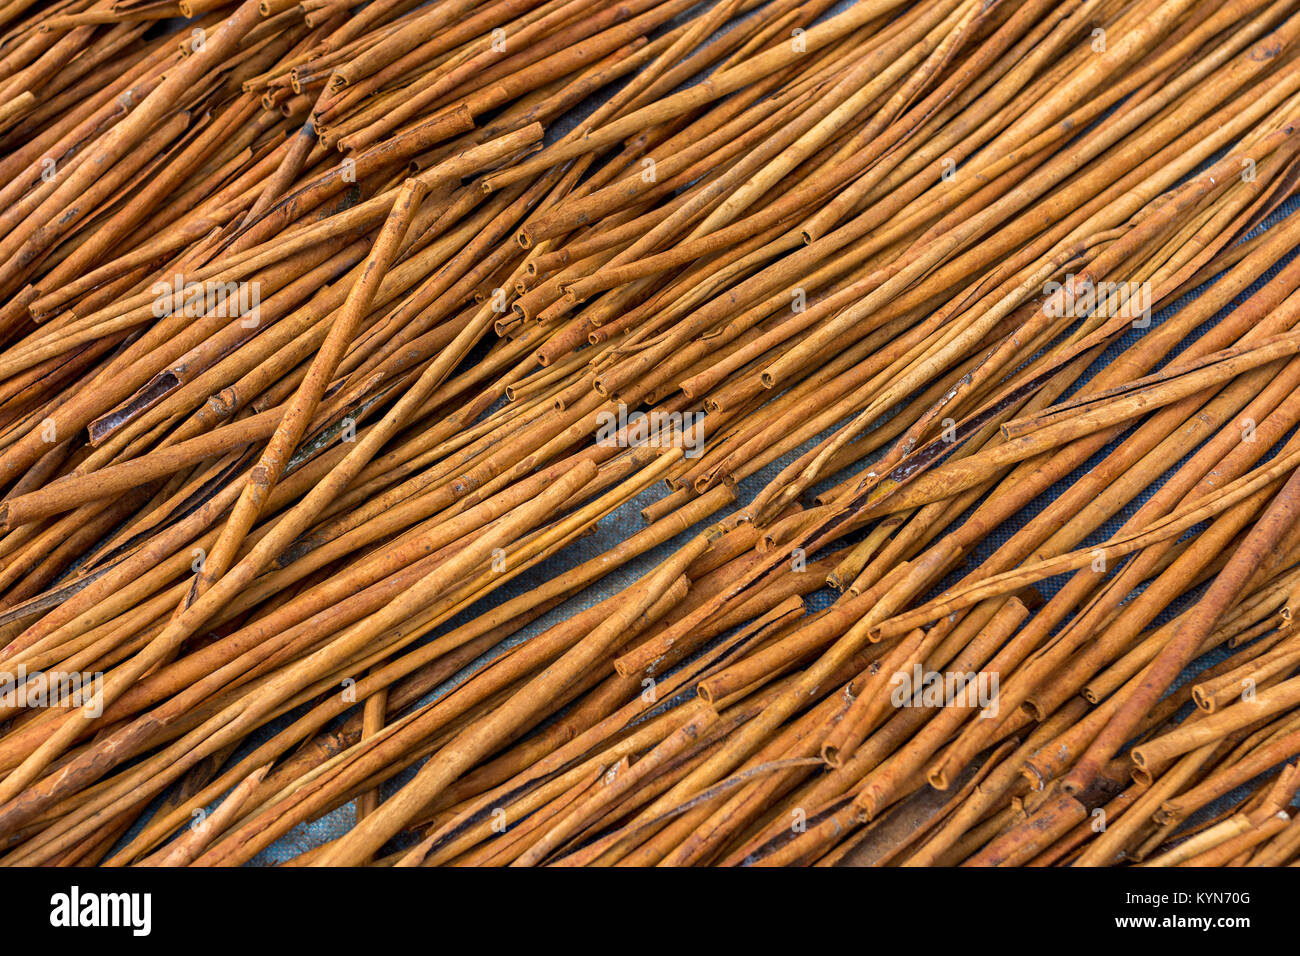 Fresh Cinnamon sticks out in the street drying in the midday sun. Viewed from above. Stock Photo